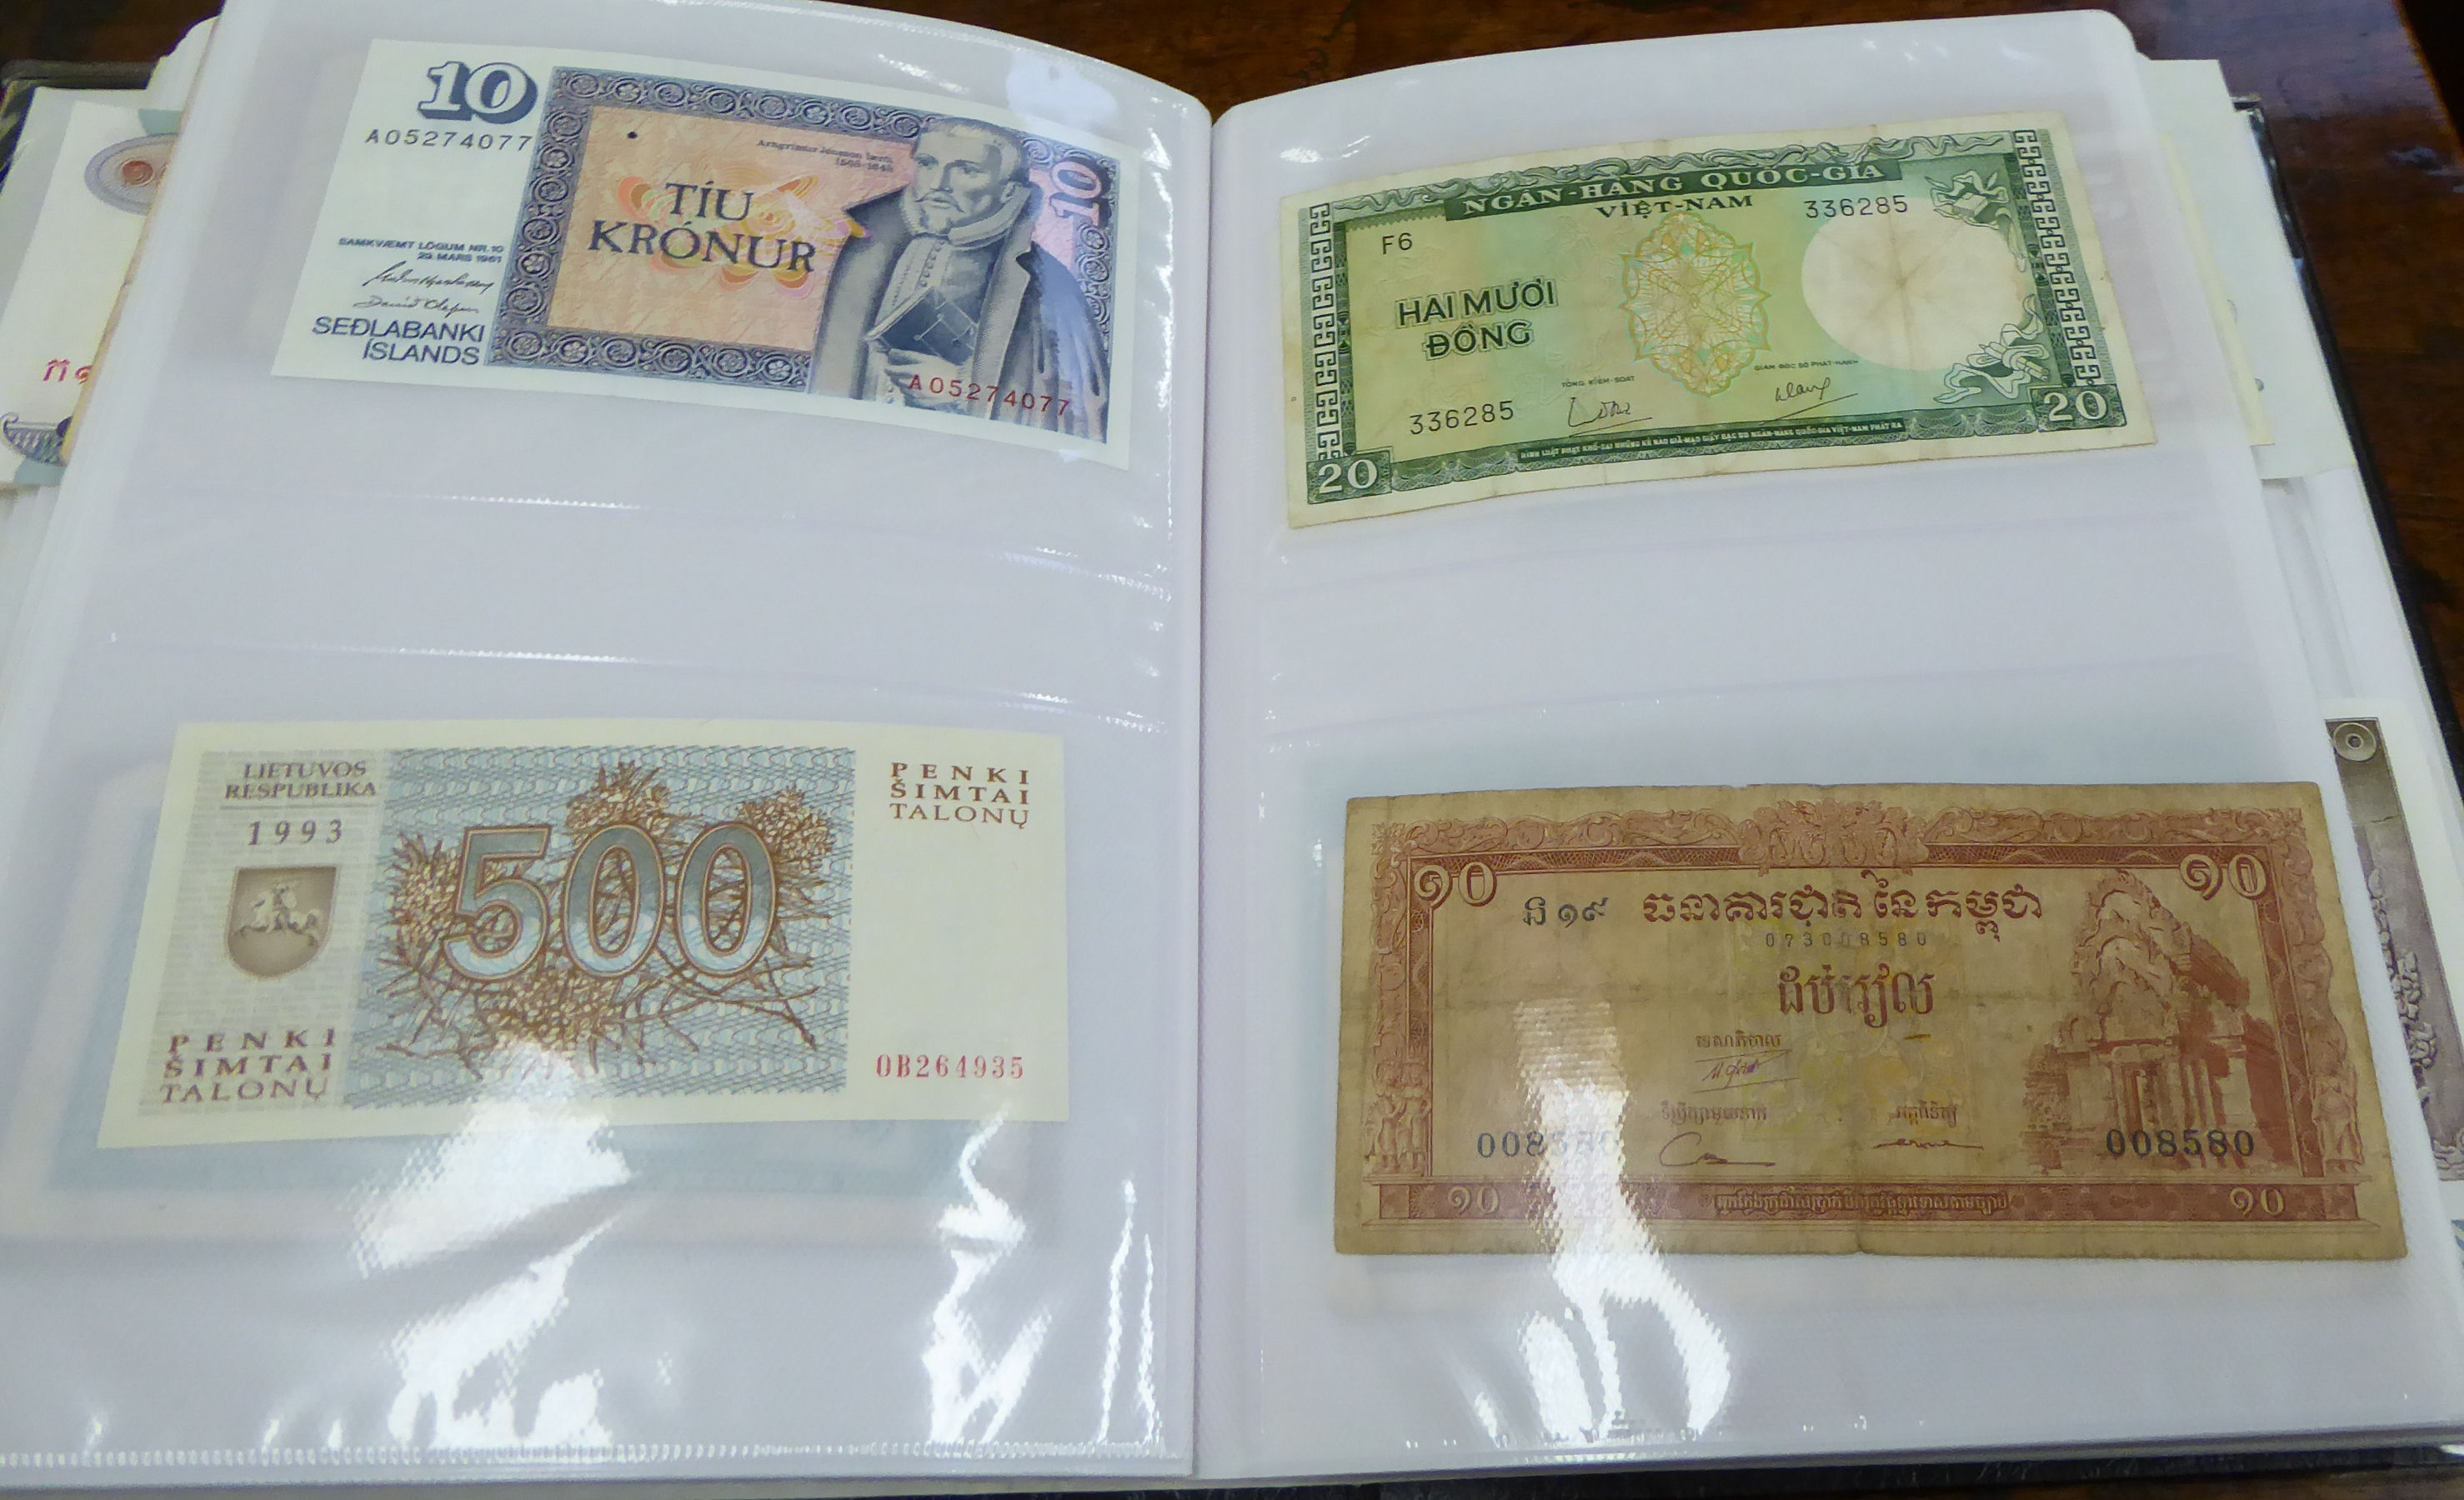 Two uncollated albums collections, containing banknotes from Peru, Uruguay, Turkey, China, Brazil, - Image 6 of 13